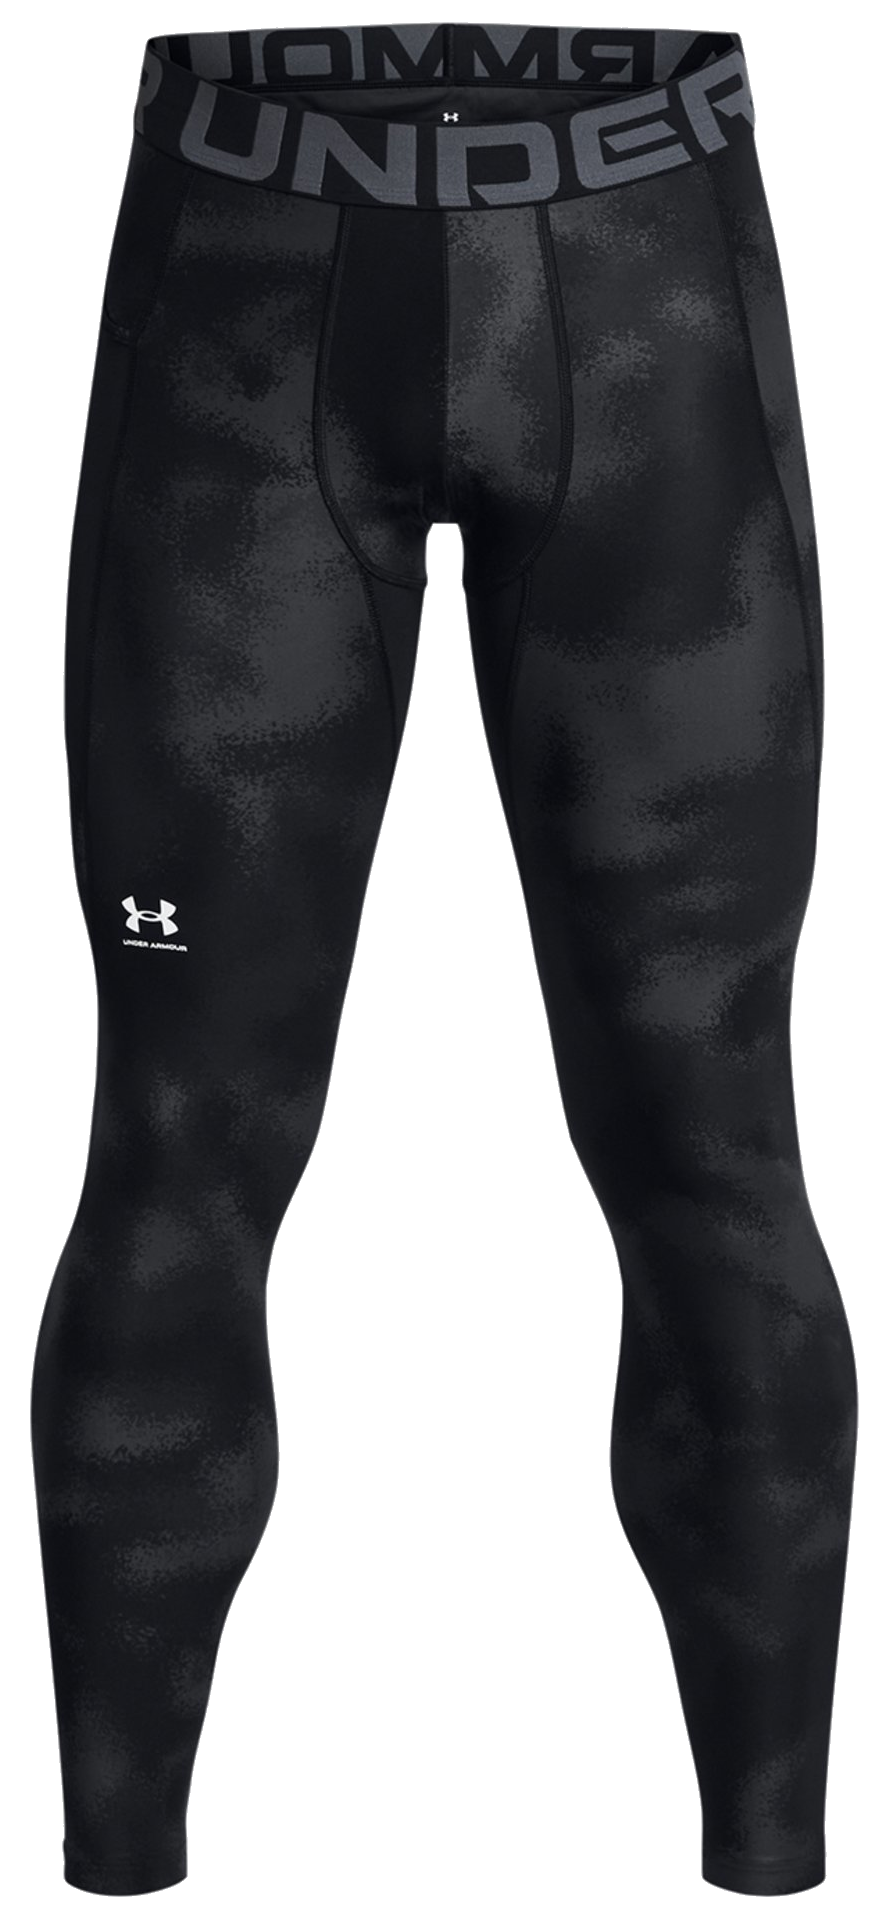 Under Armour Heatgear Armour Printed Compression Tights Men's